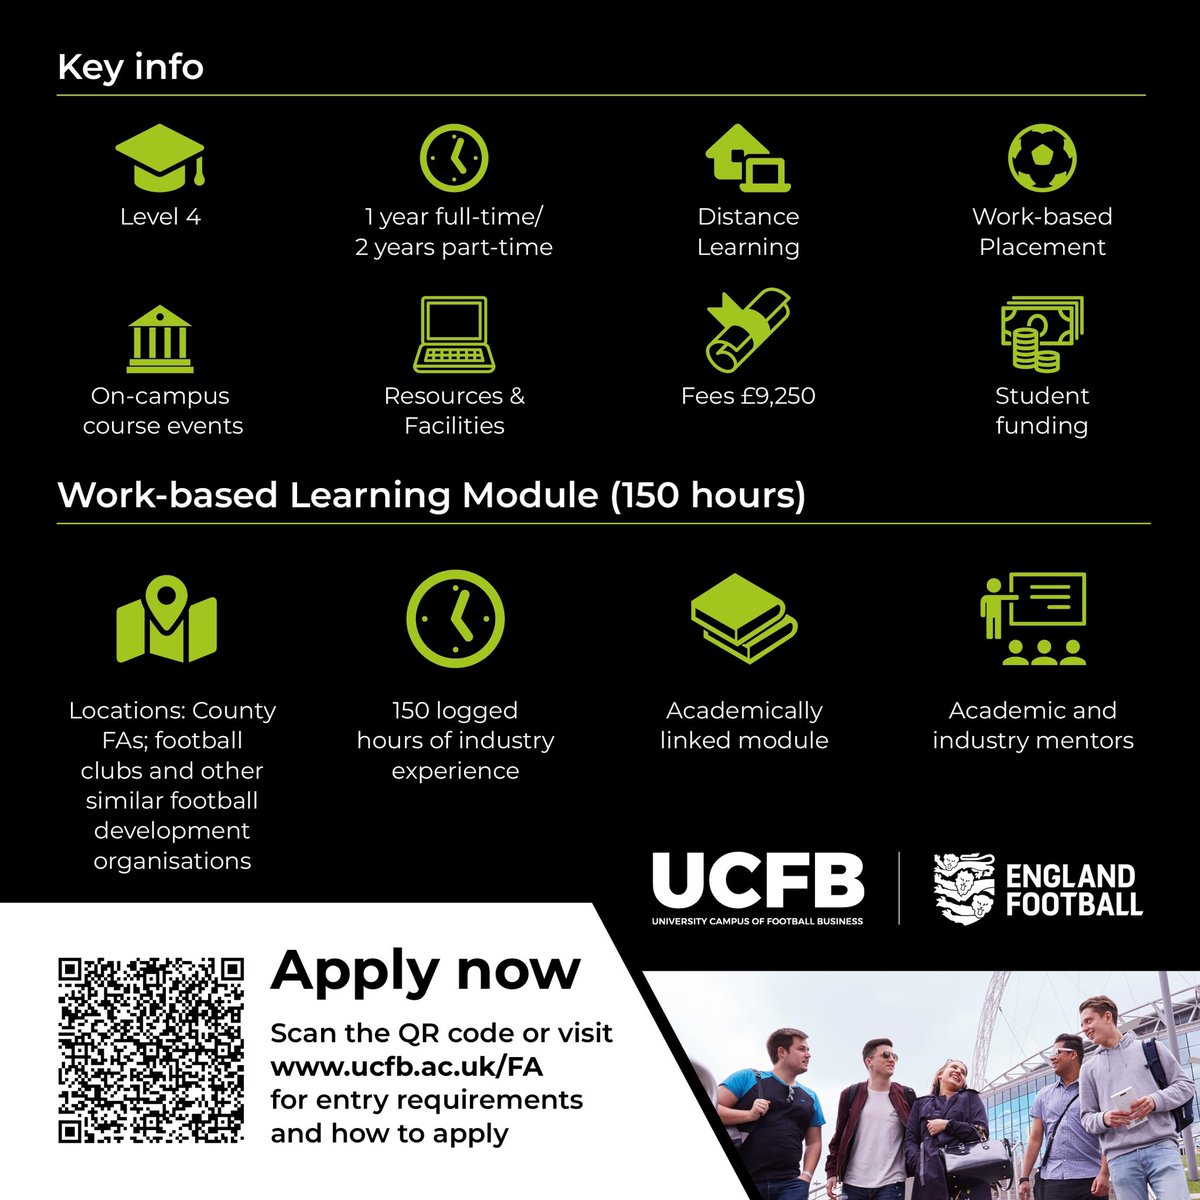 .@UCFB has launched a new Certificate of HE in collaboration with @EnglandFootball and the @FA to support career opportunities within football development 🎓 It includes one year of distance learning, with 150 hours of industry experience. Read more: bit.ly/3Vh6vBW